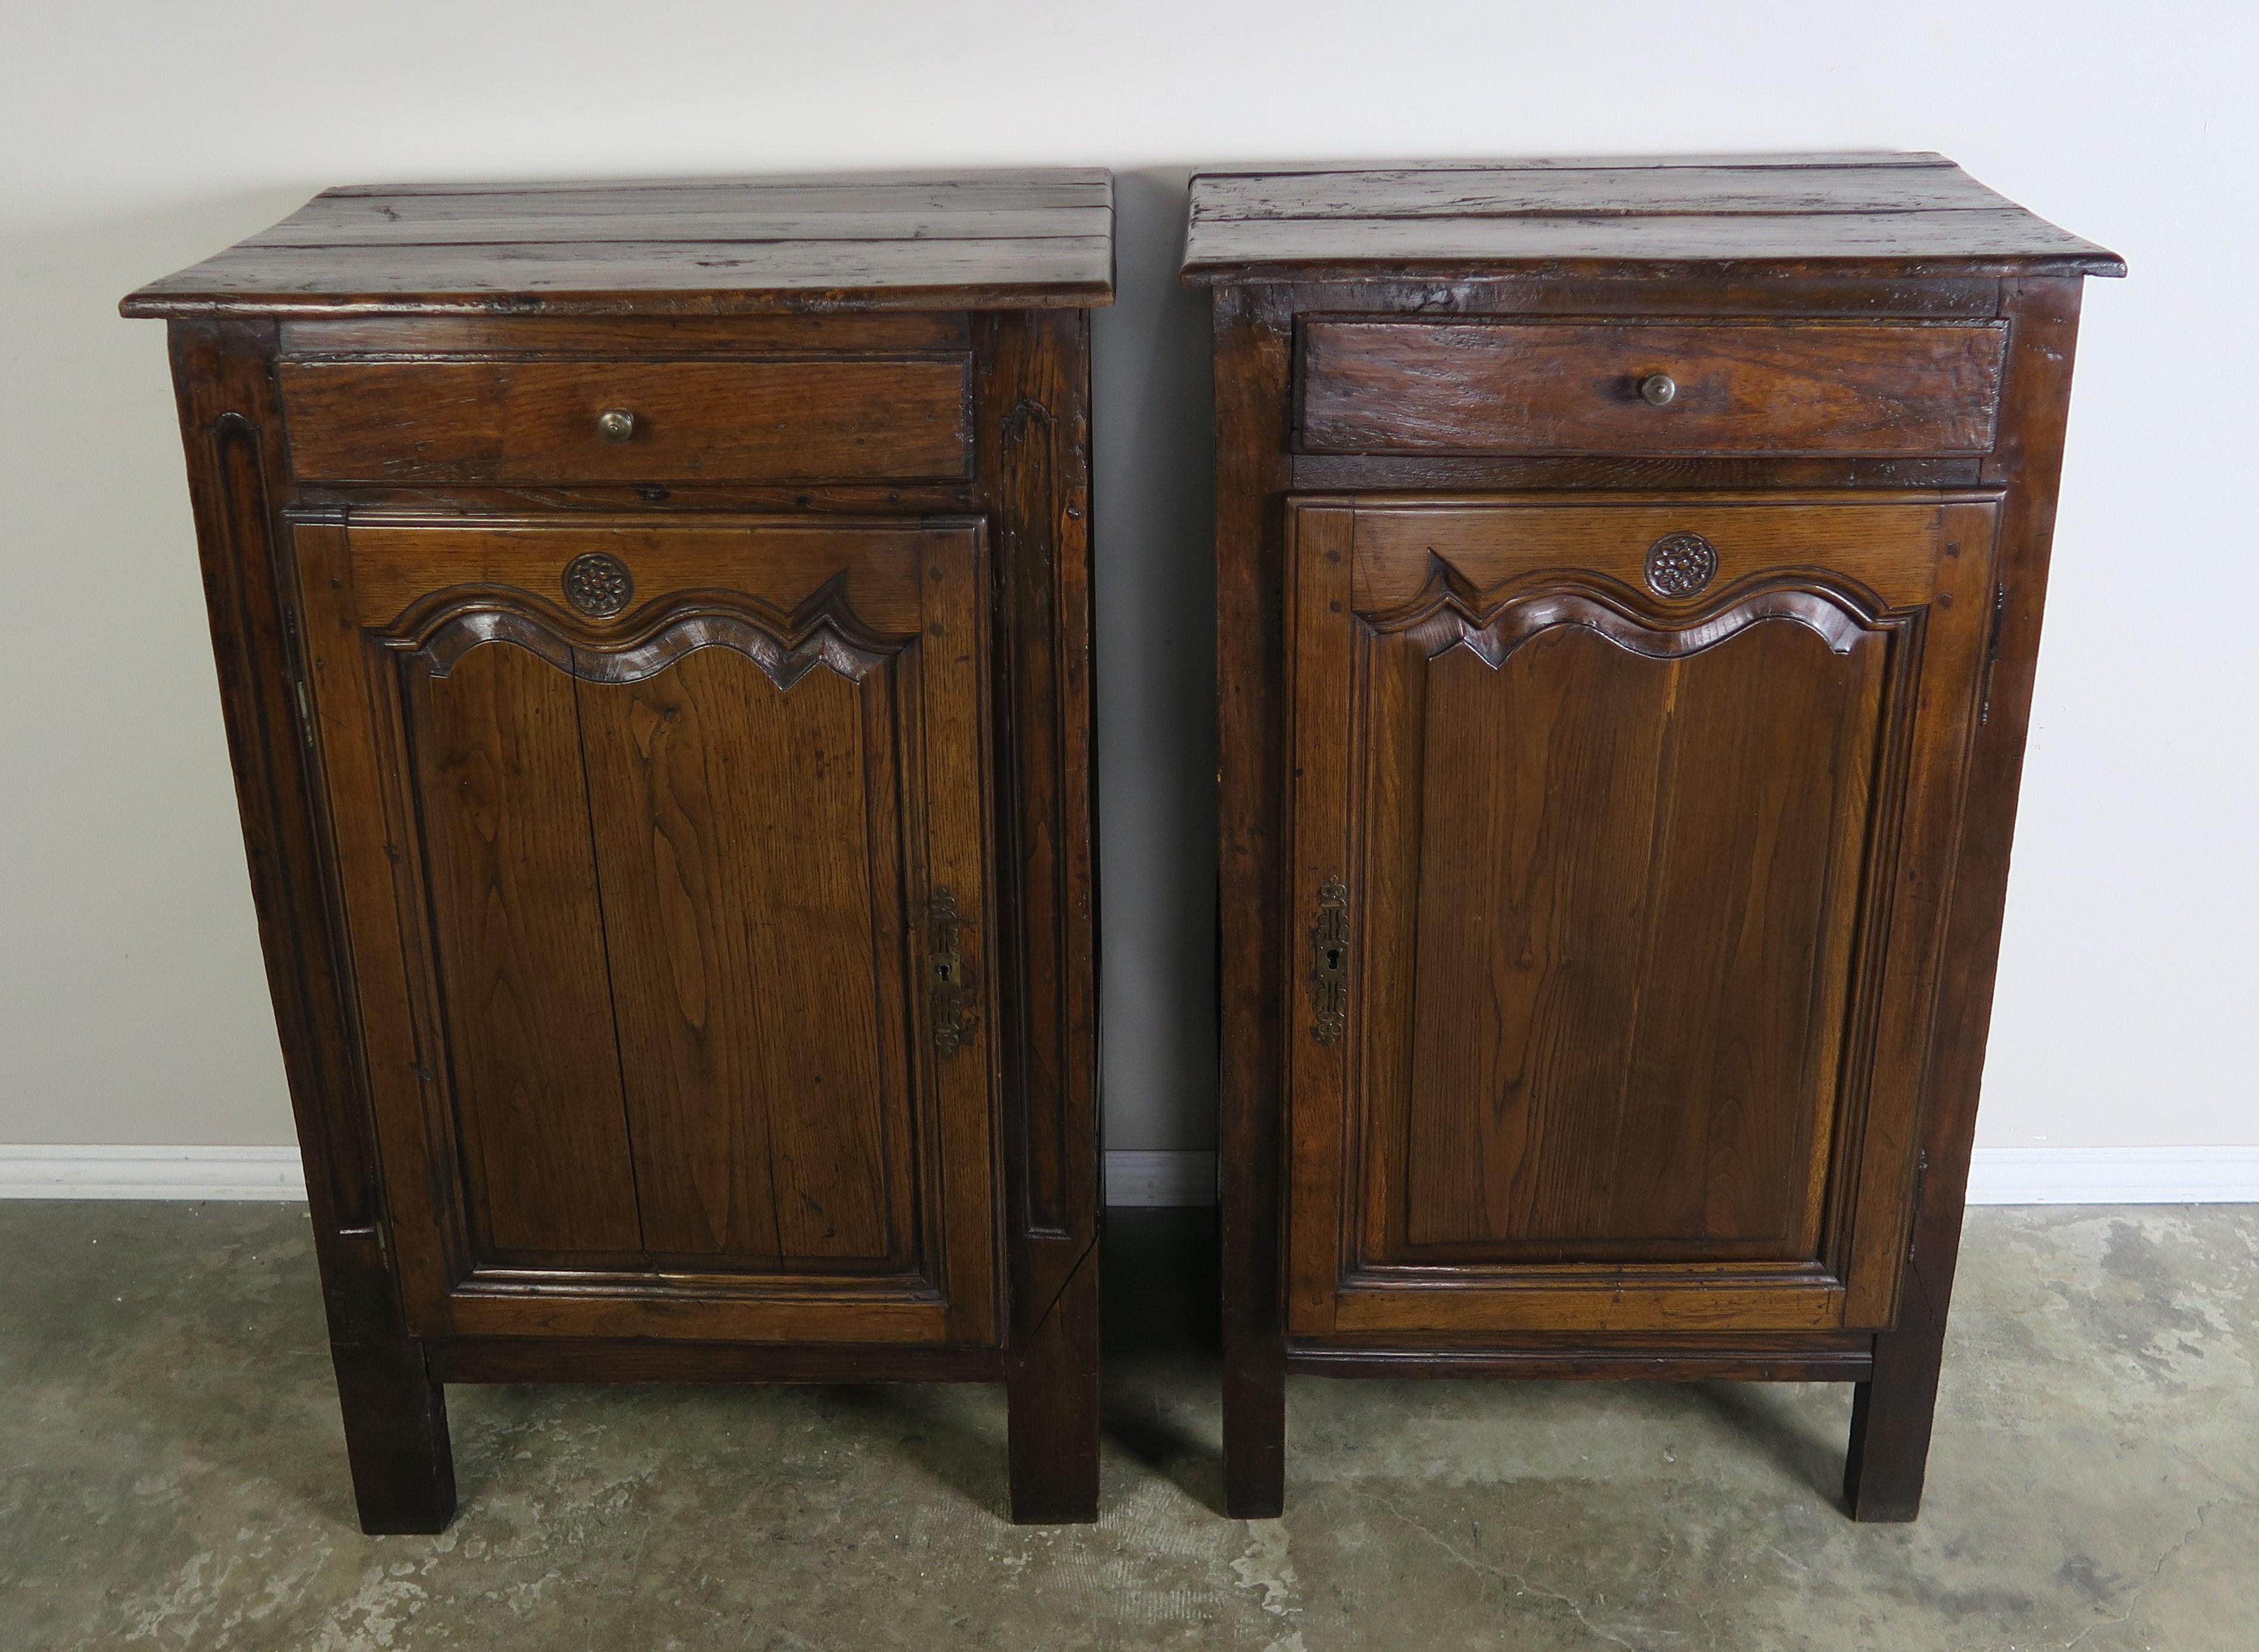 Pair of 19th century French Provincial style walnut cabinets with original brass hardware. Each cabinet has a drawer and paneled door that hides two shelves. Great storage pieces.